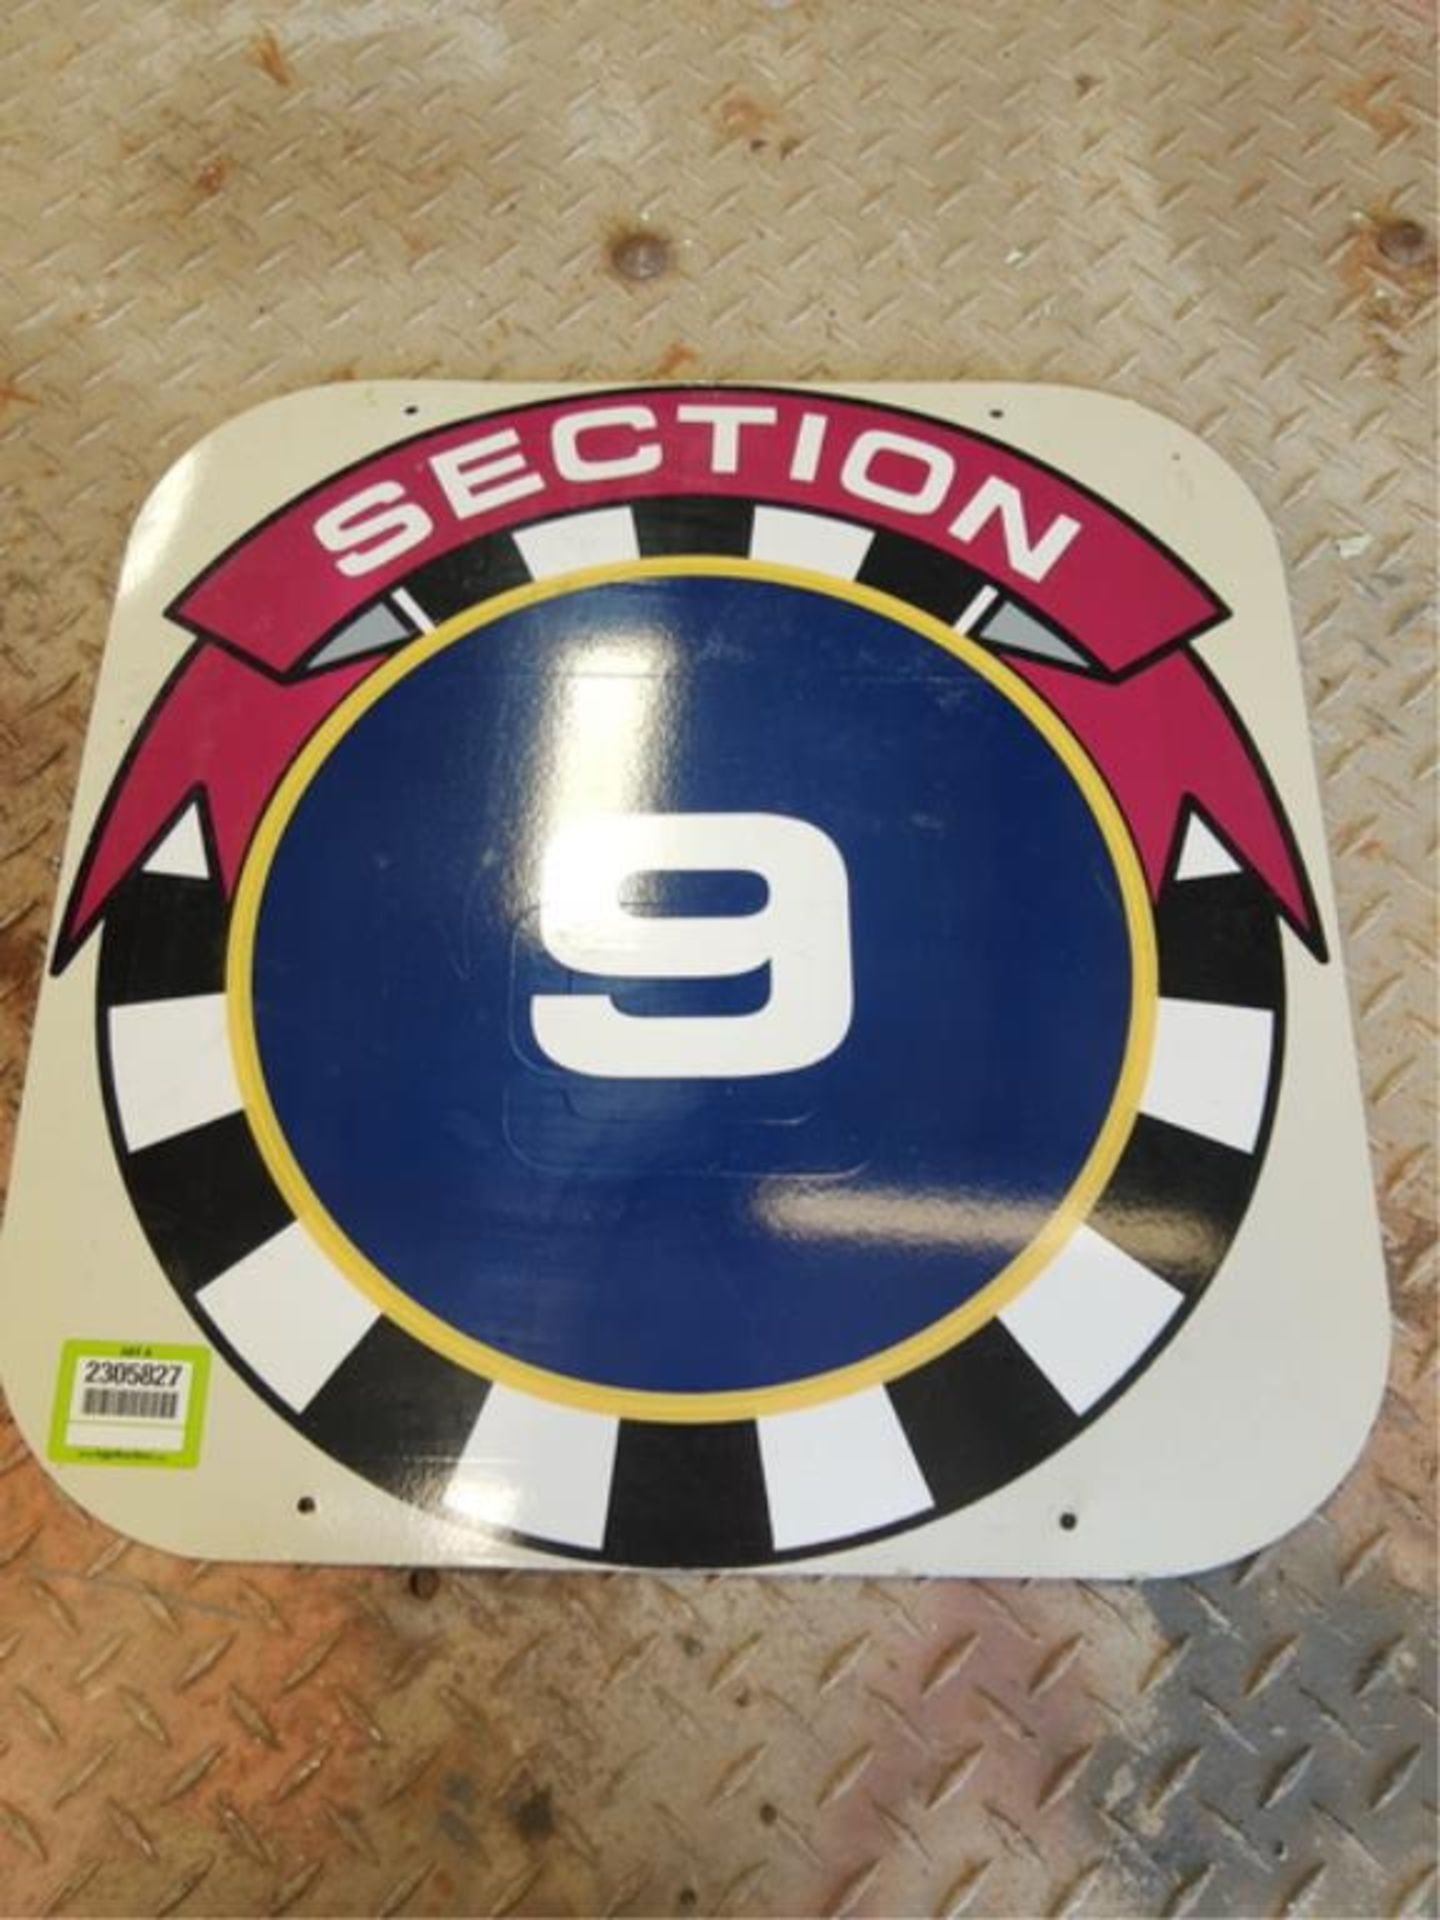 Section 9 Sign